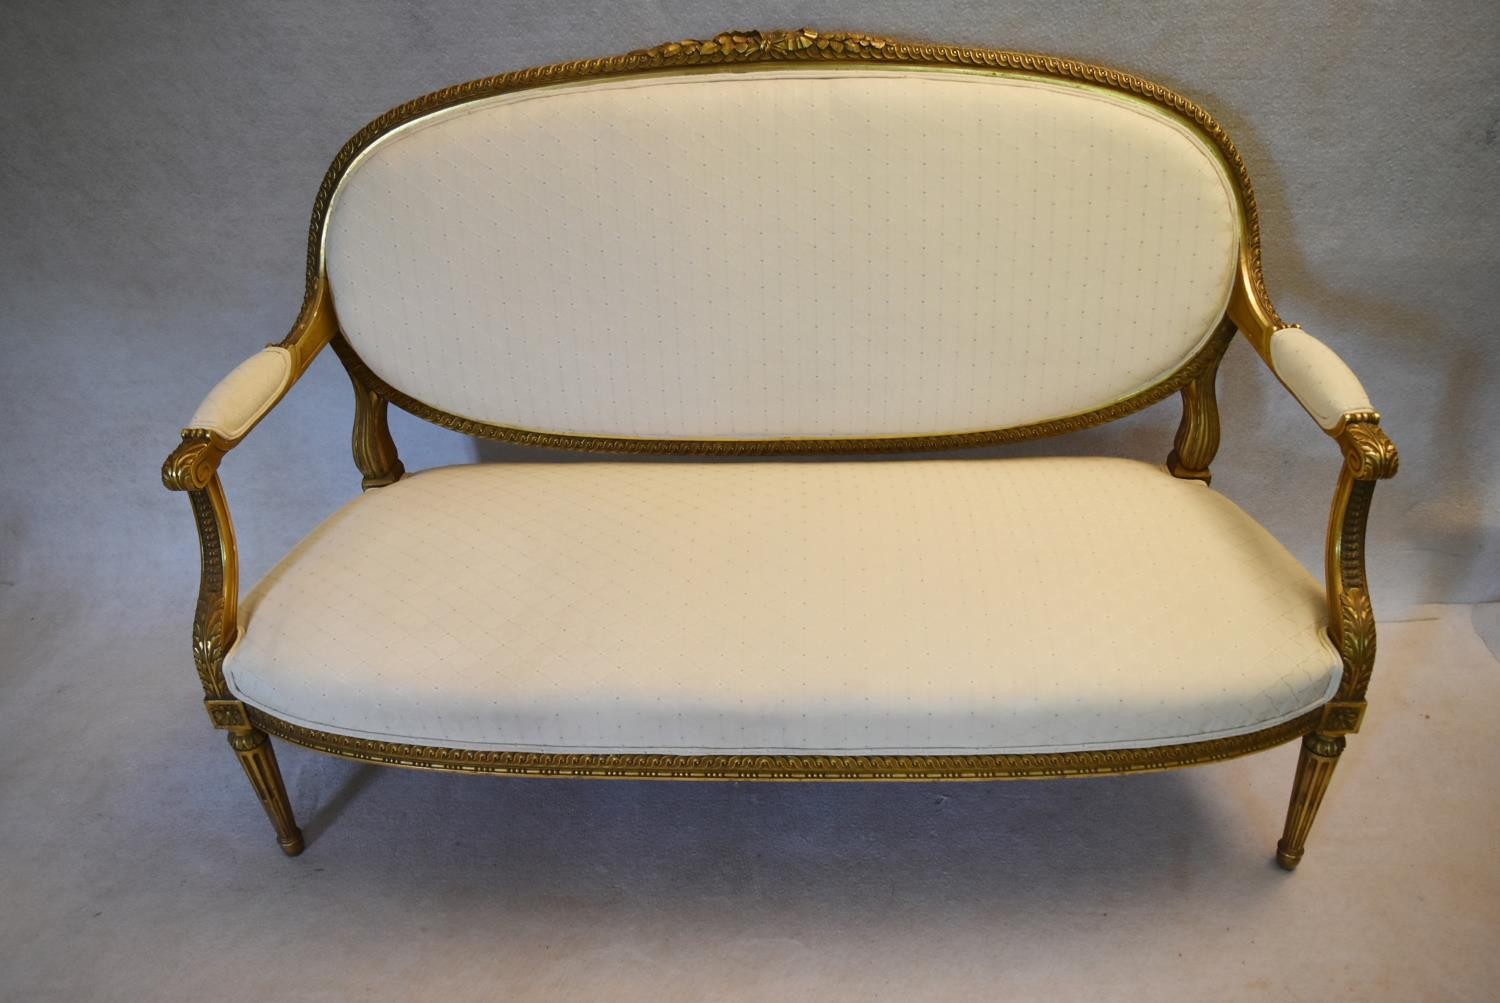 A 19th century French carved giltwood canape with ribbon and floral carved back rail reupholstered - Image 2 of 7